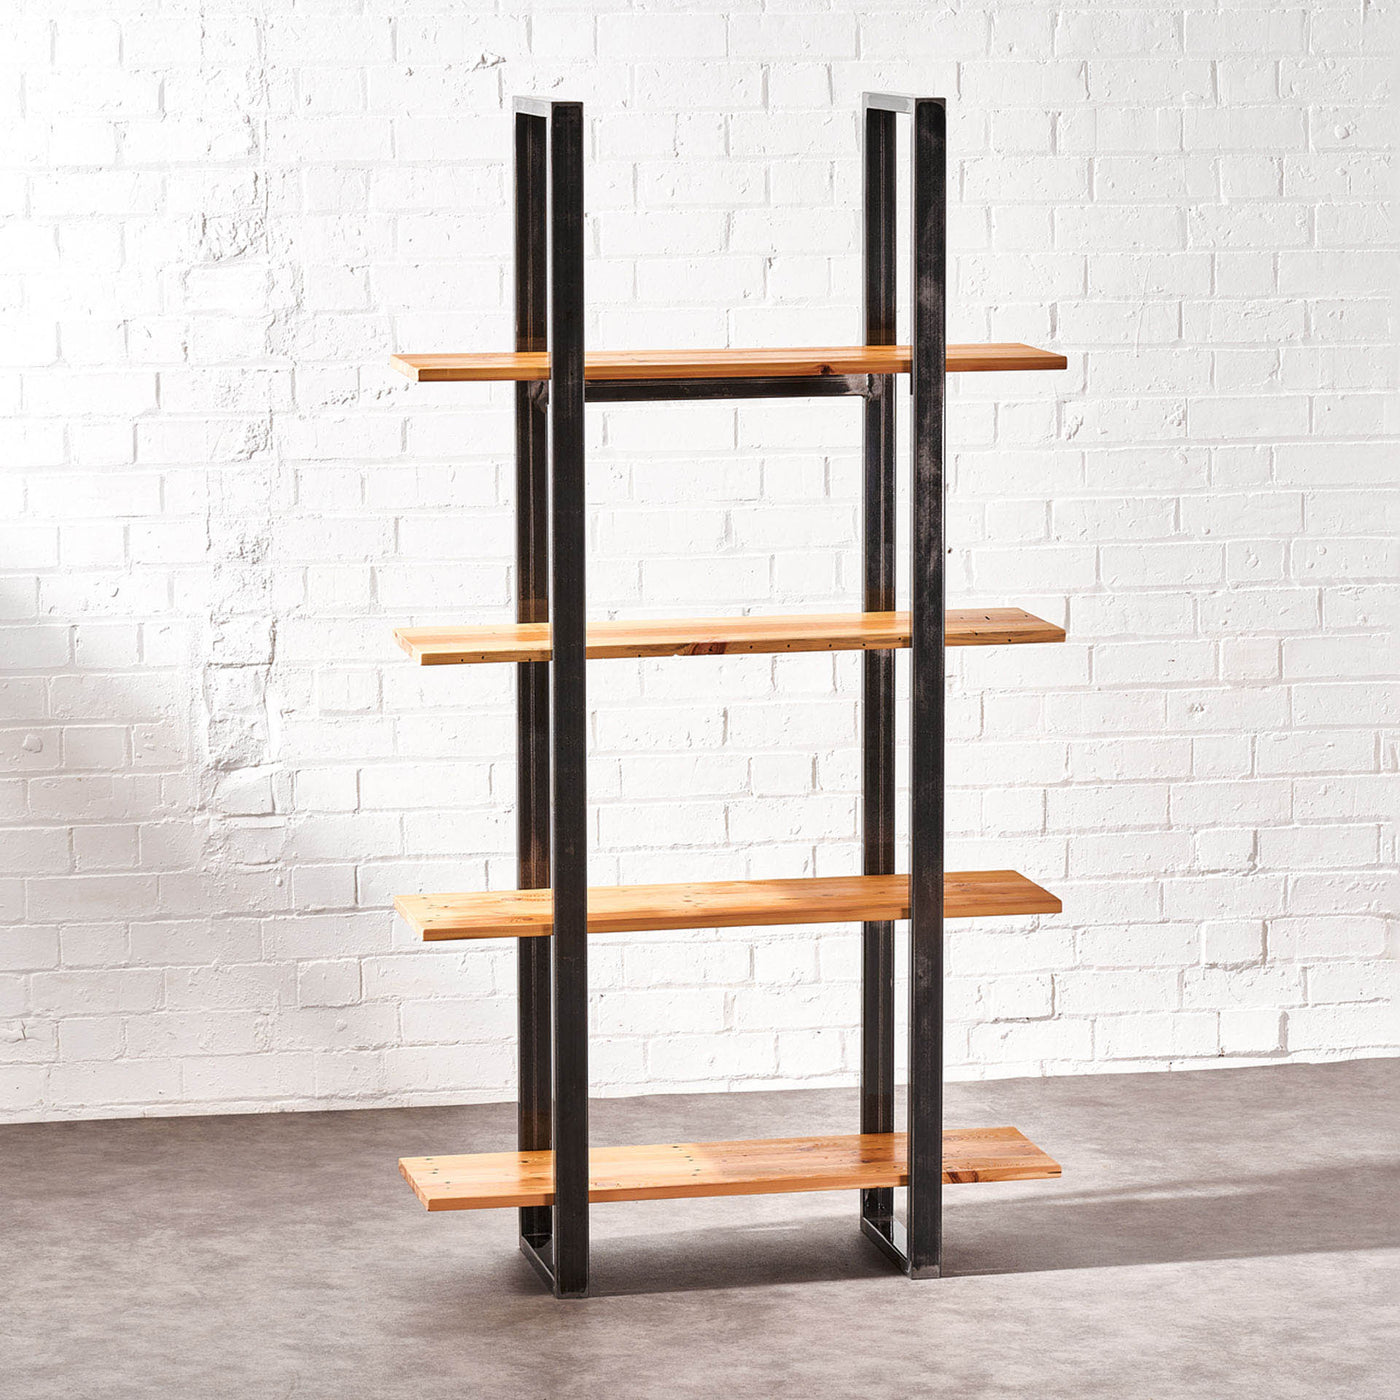 Handcrafted Tall Storage Unit with Reclaimed Timber and UK Forged Steel in Various Sizes